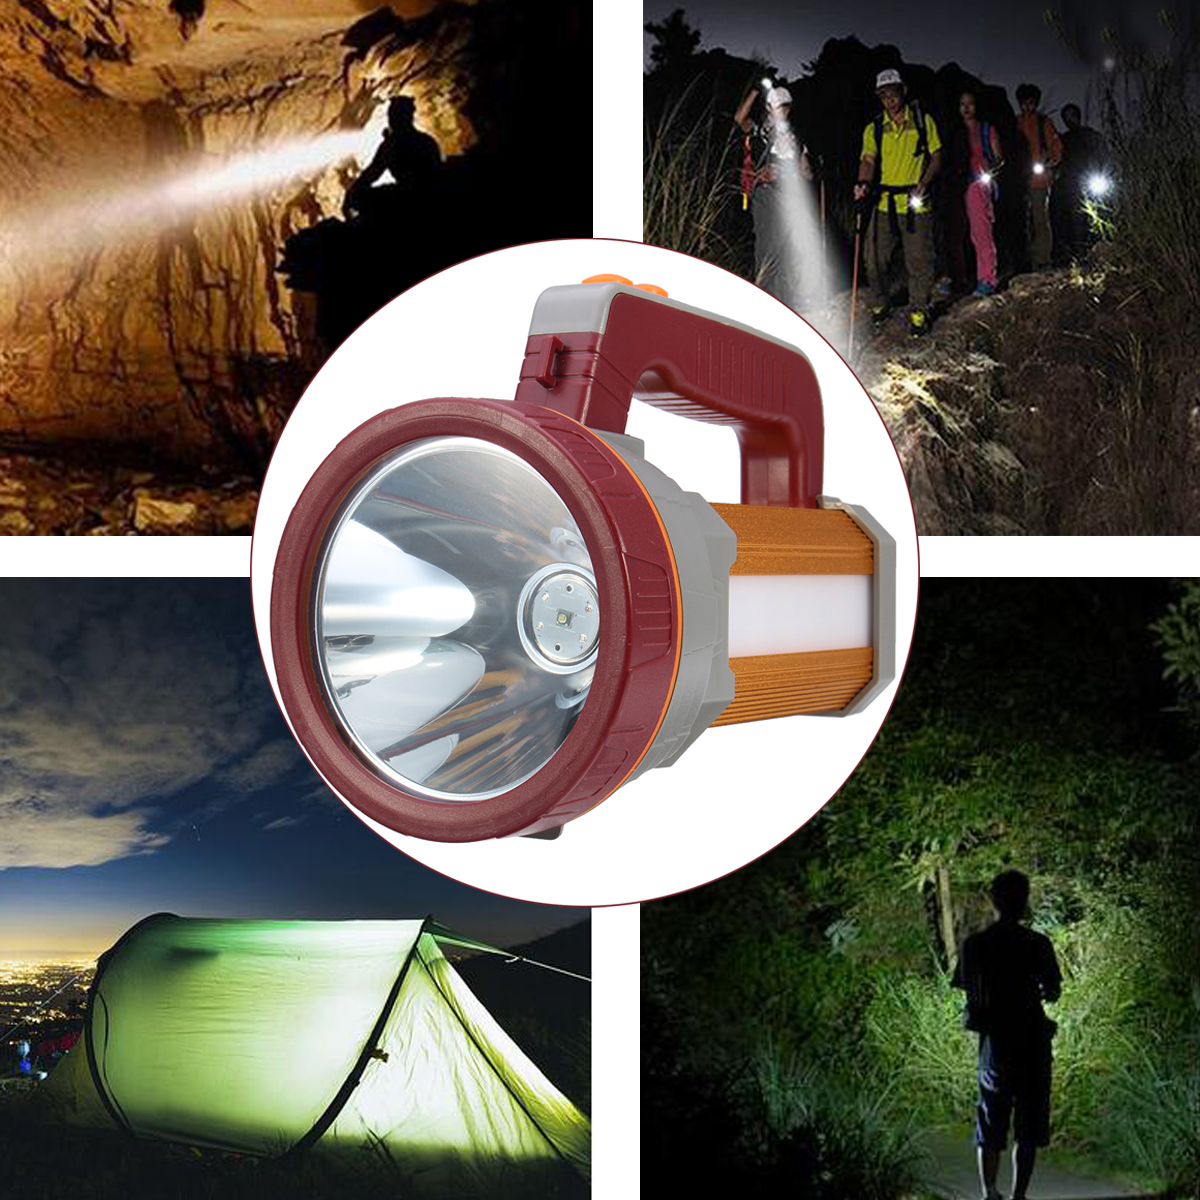 3000LM-USB-Rechargeable-Waterproof-Portable-LED-Spotlight-Searchlight-1605853